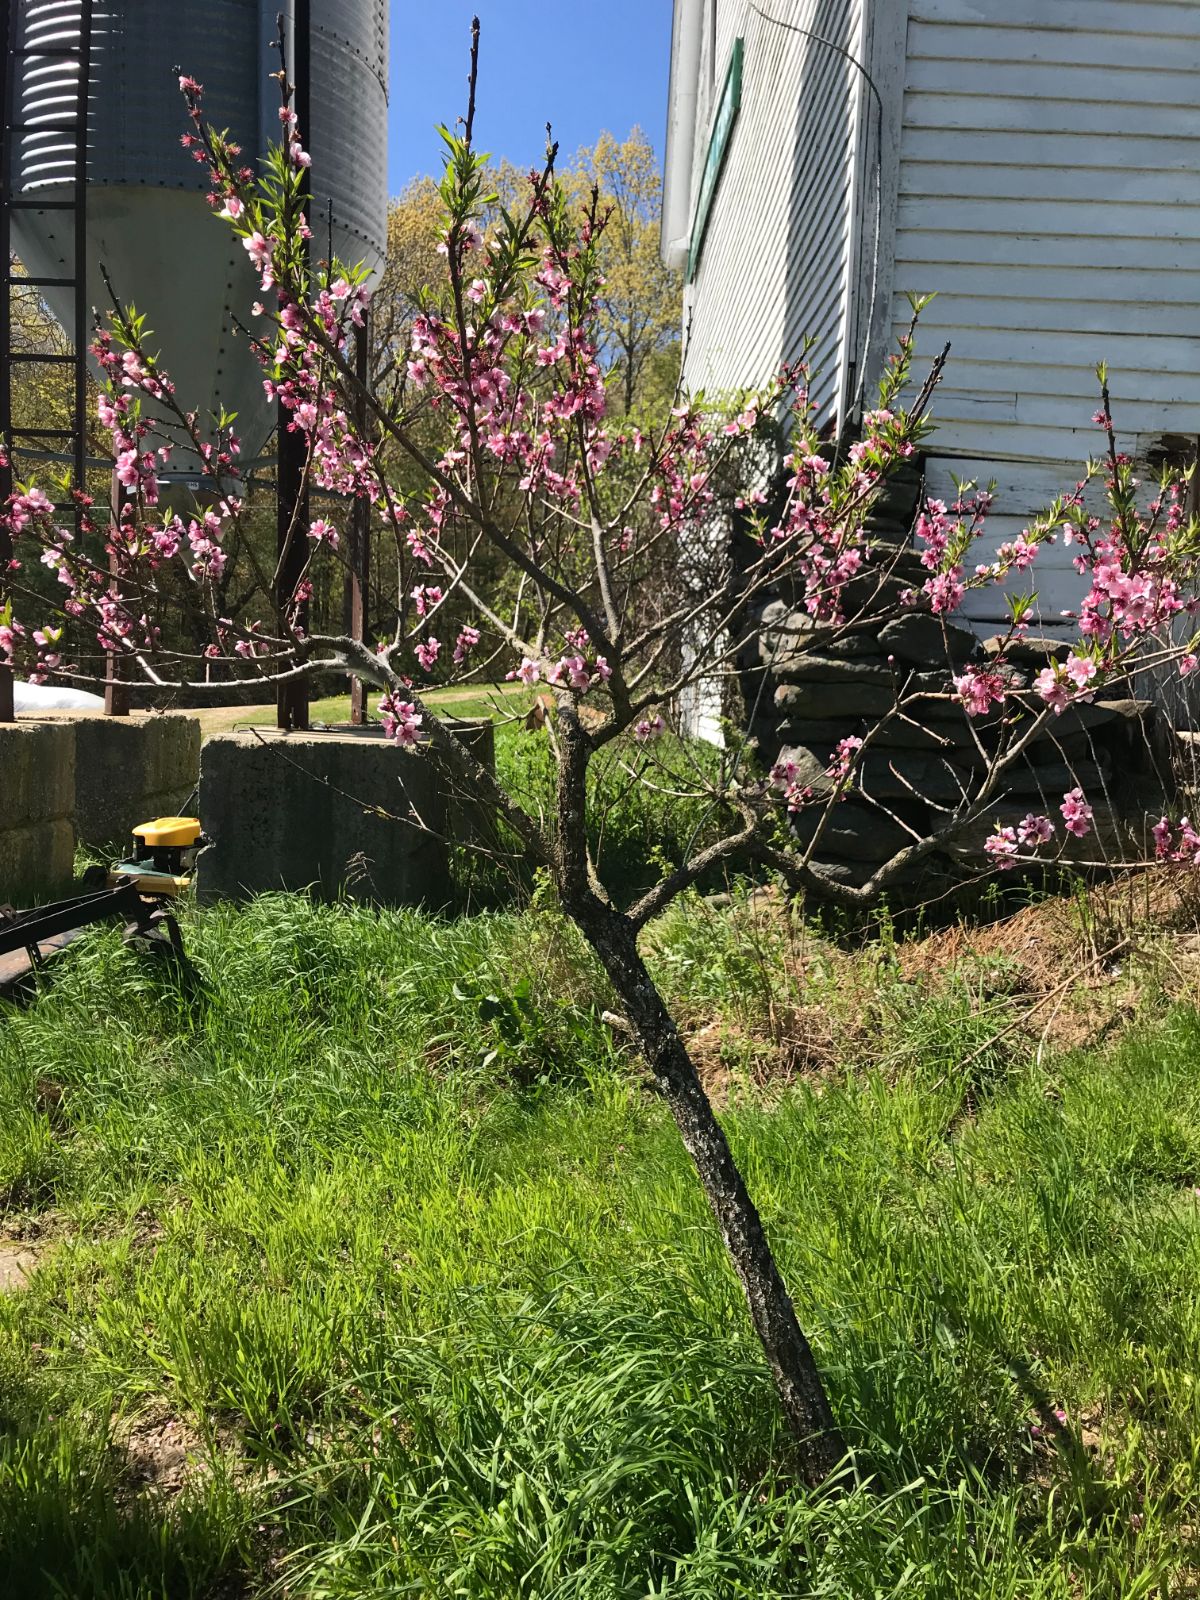 A nectarine tree blooming in spring